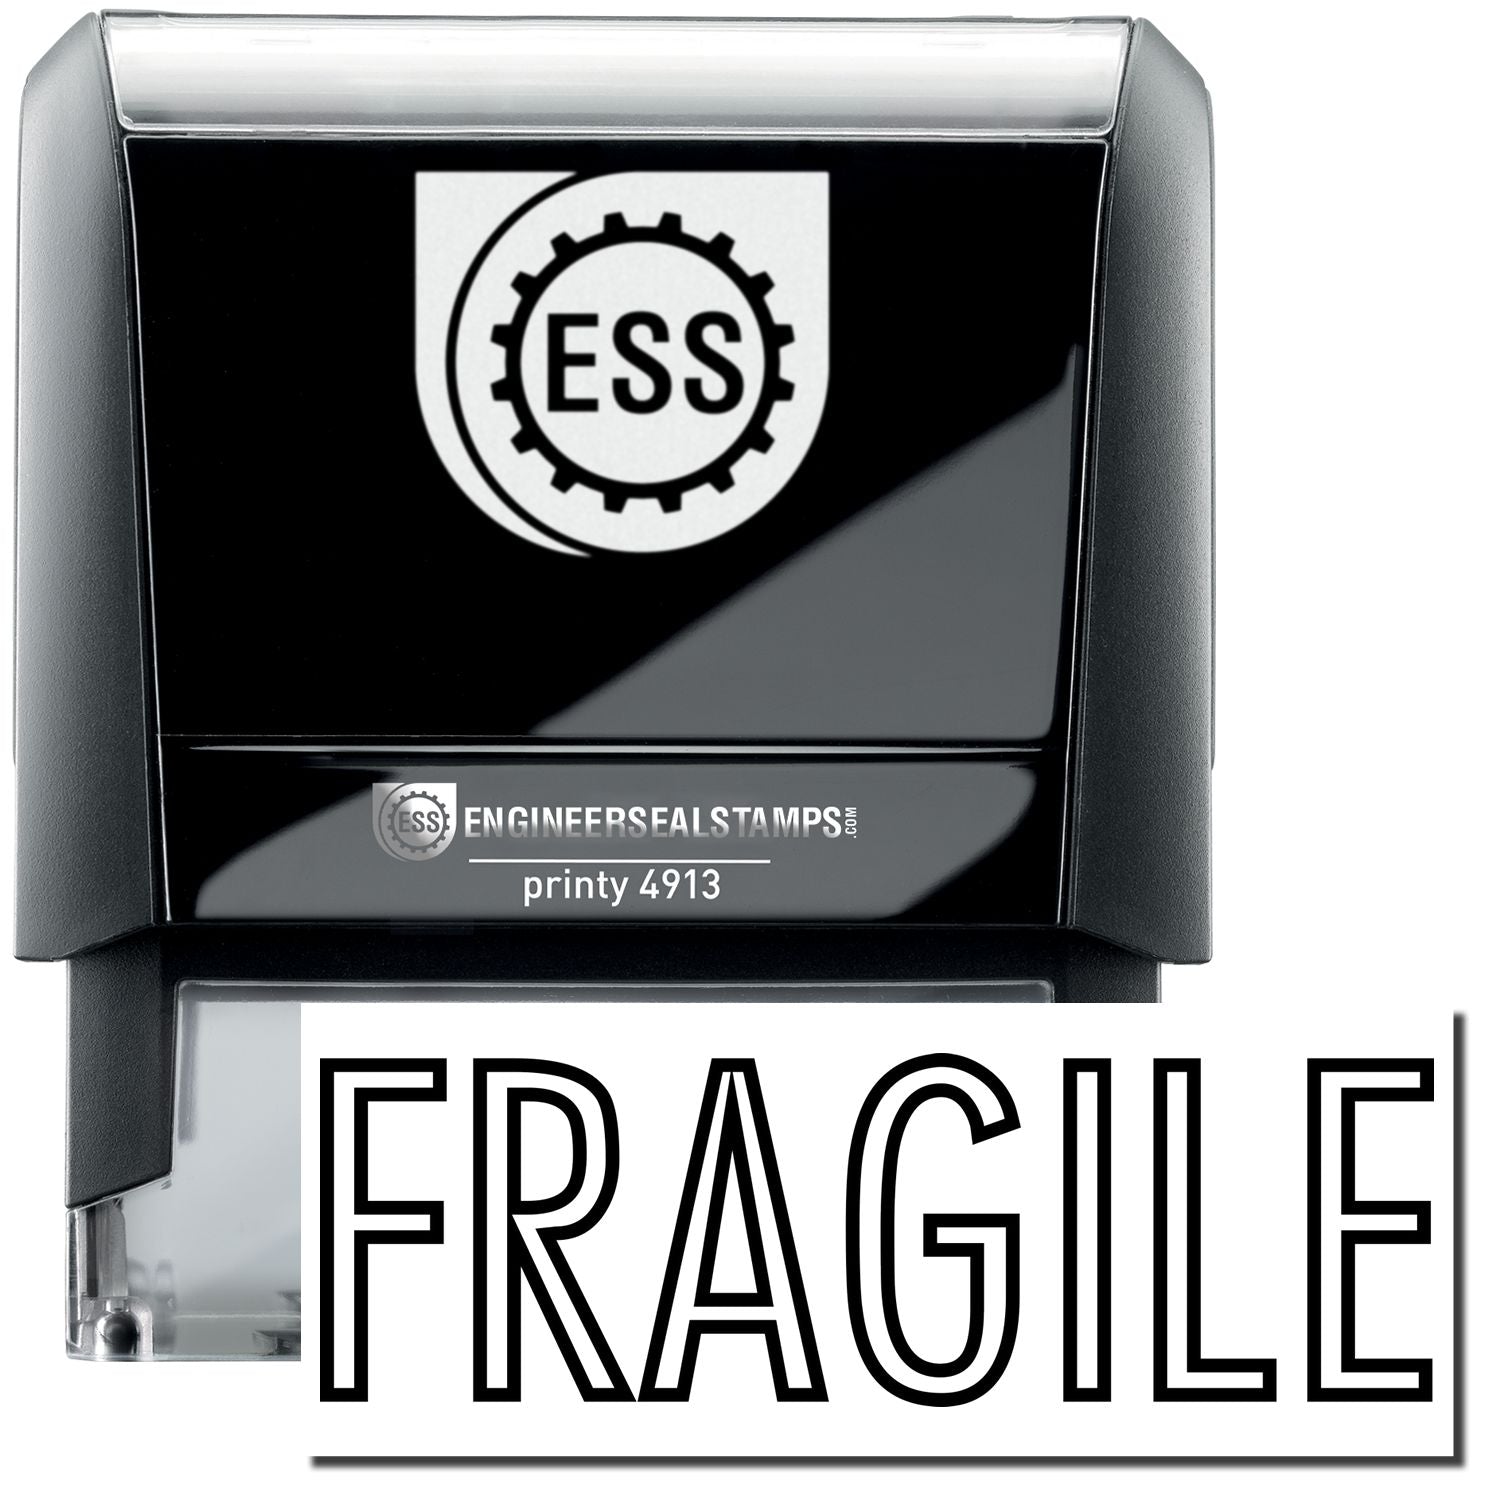 A self-inking stamp with a stamped image showing how the text "FRAGILE" in a large outline style is displayed by it after stamping.